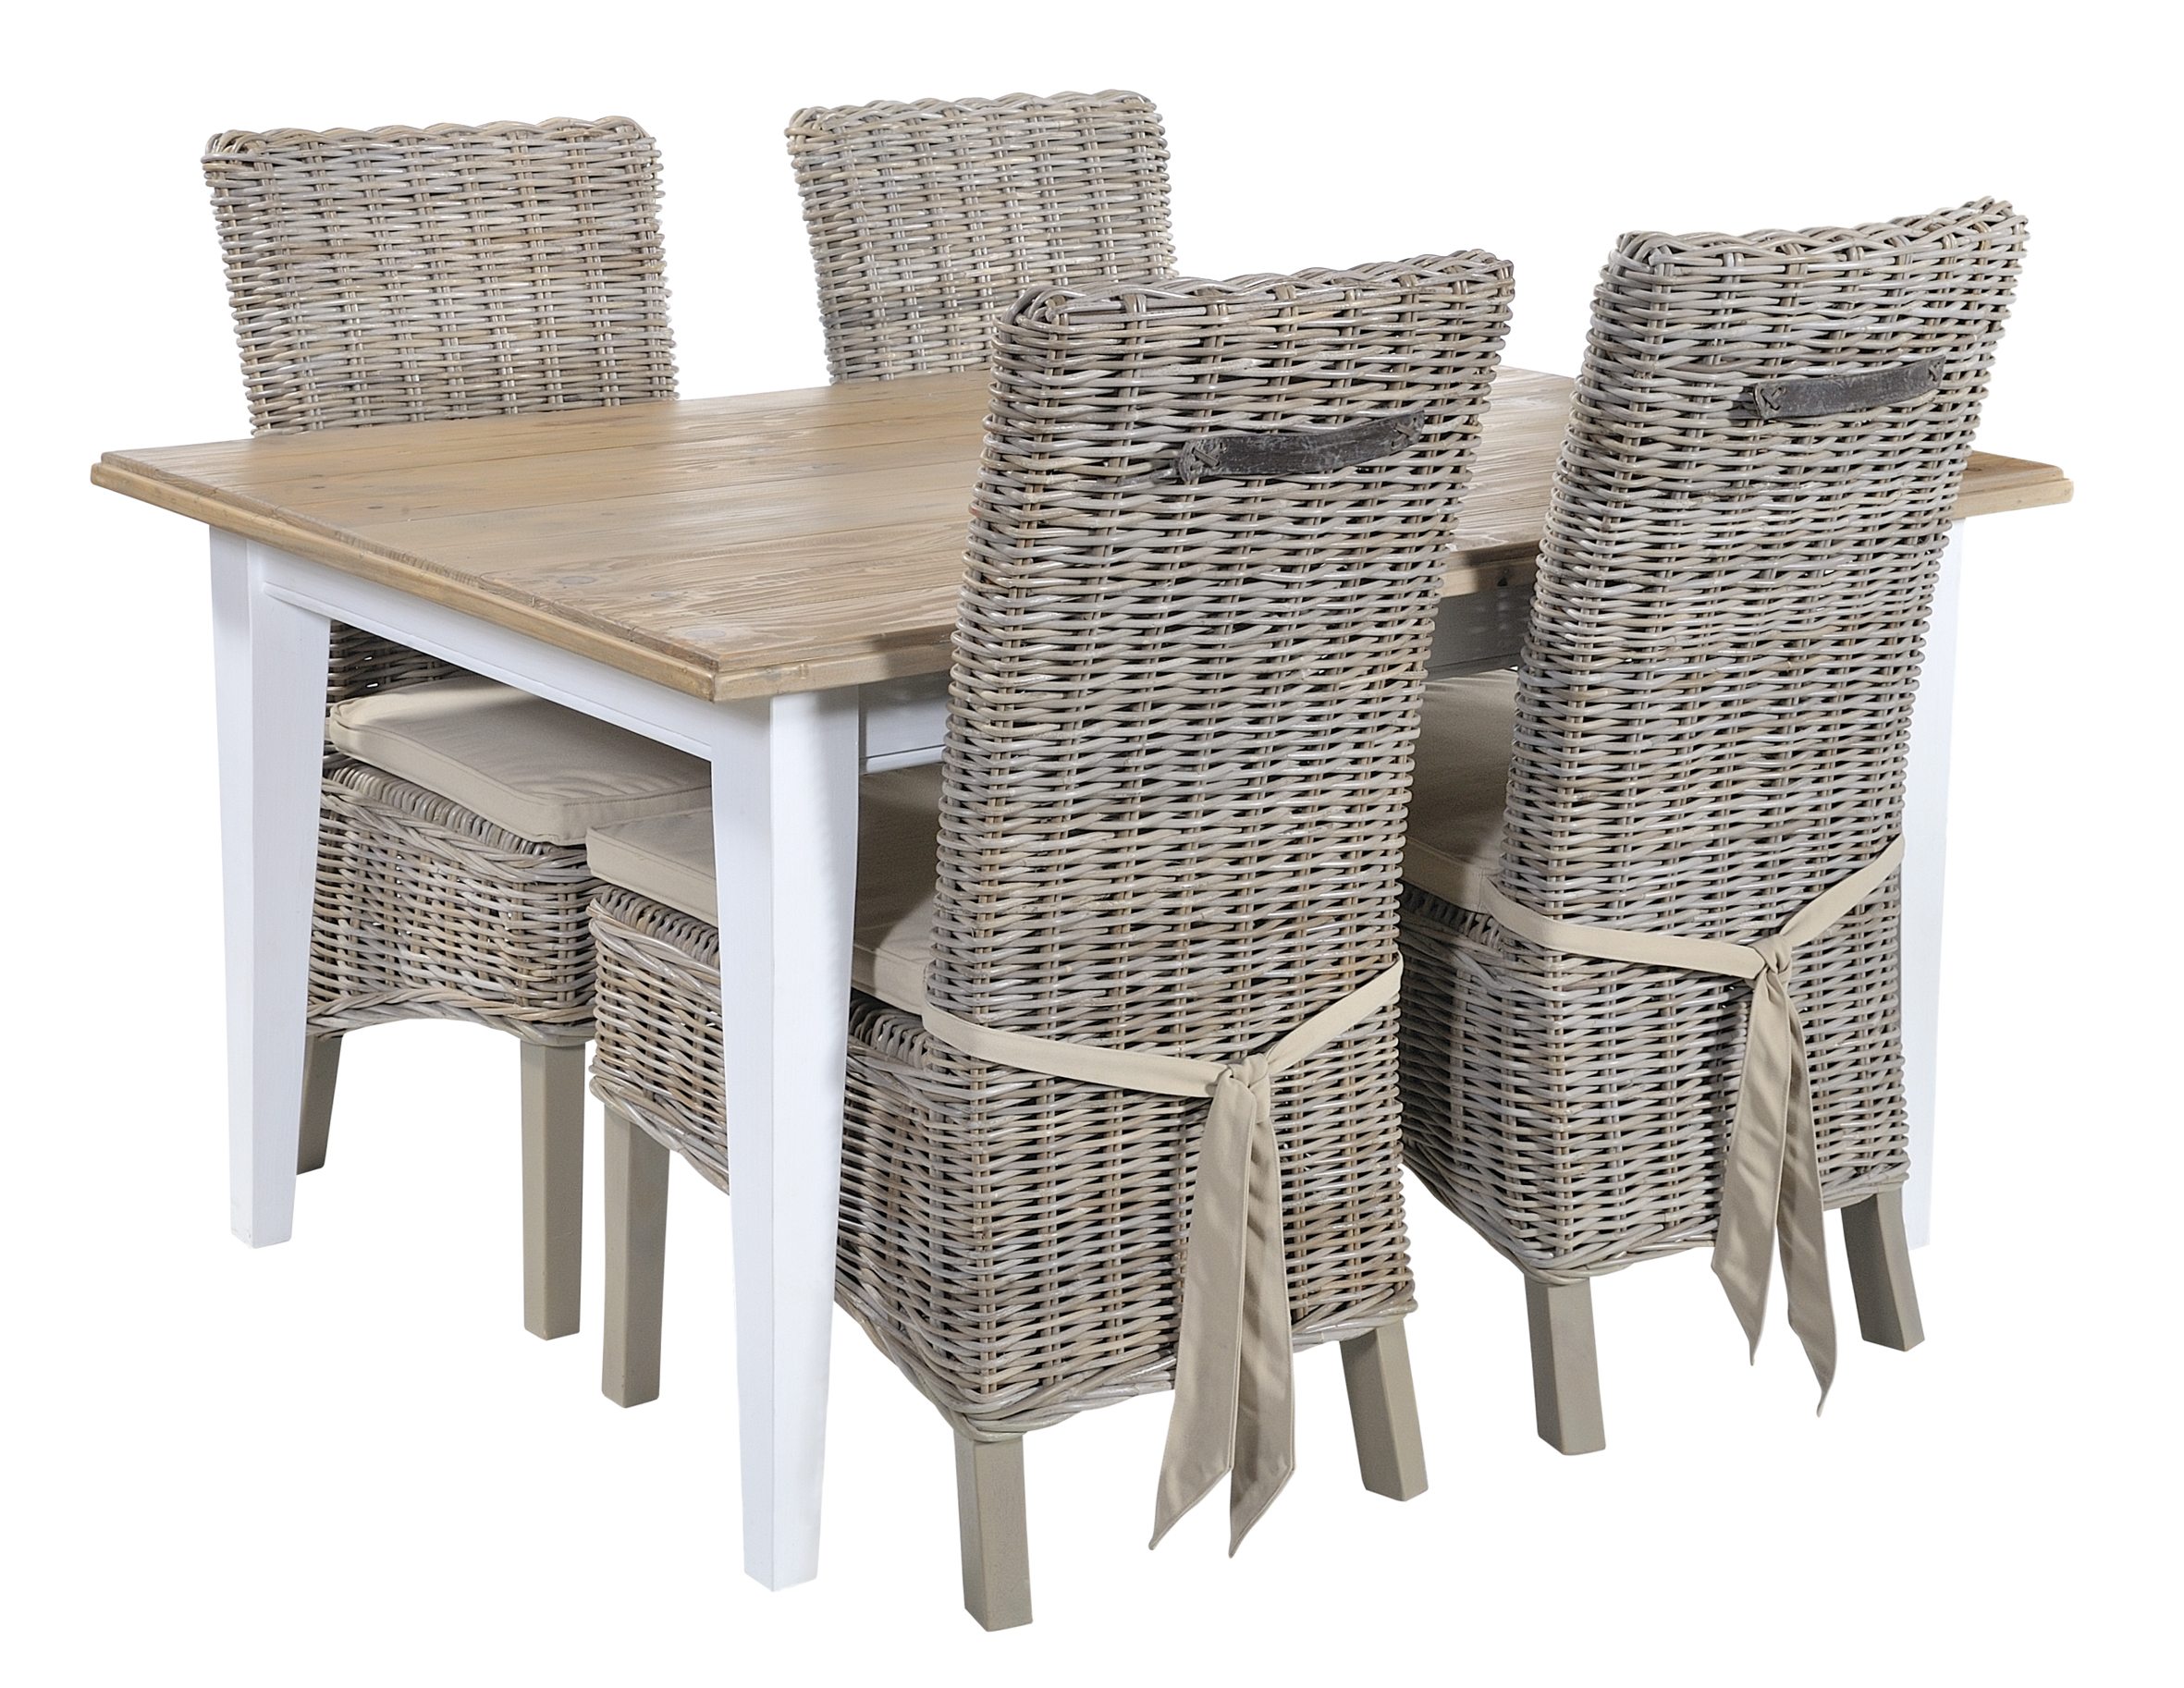 Lulworth_Dining_Table_Rattan_GW_Chairs - Haven Furniture